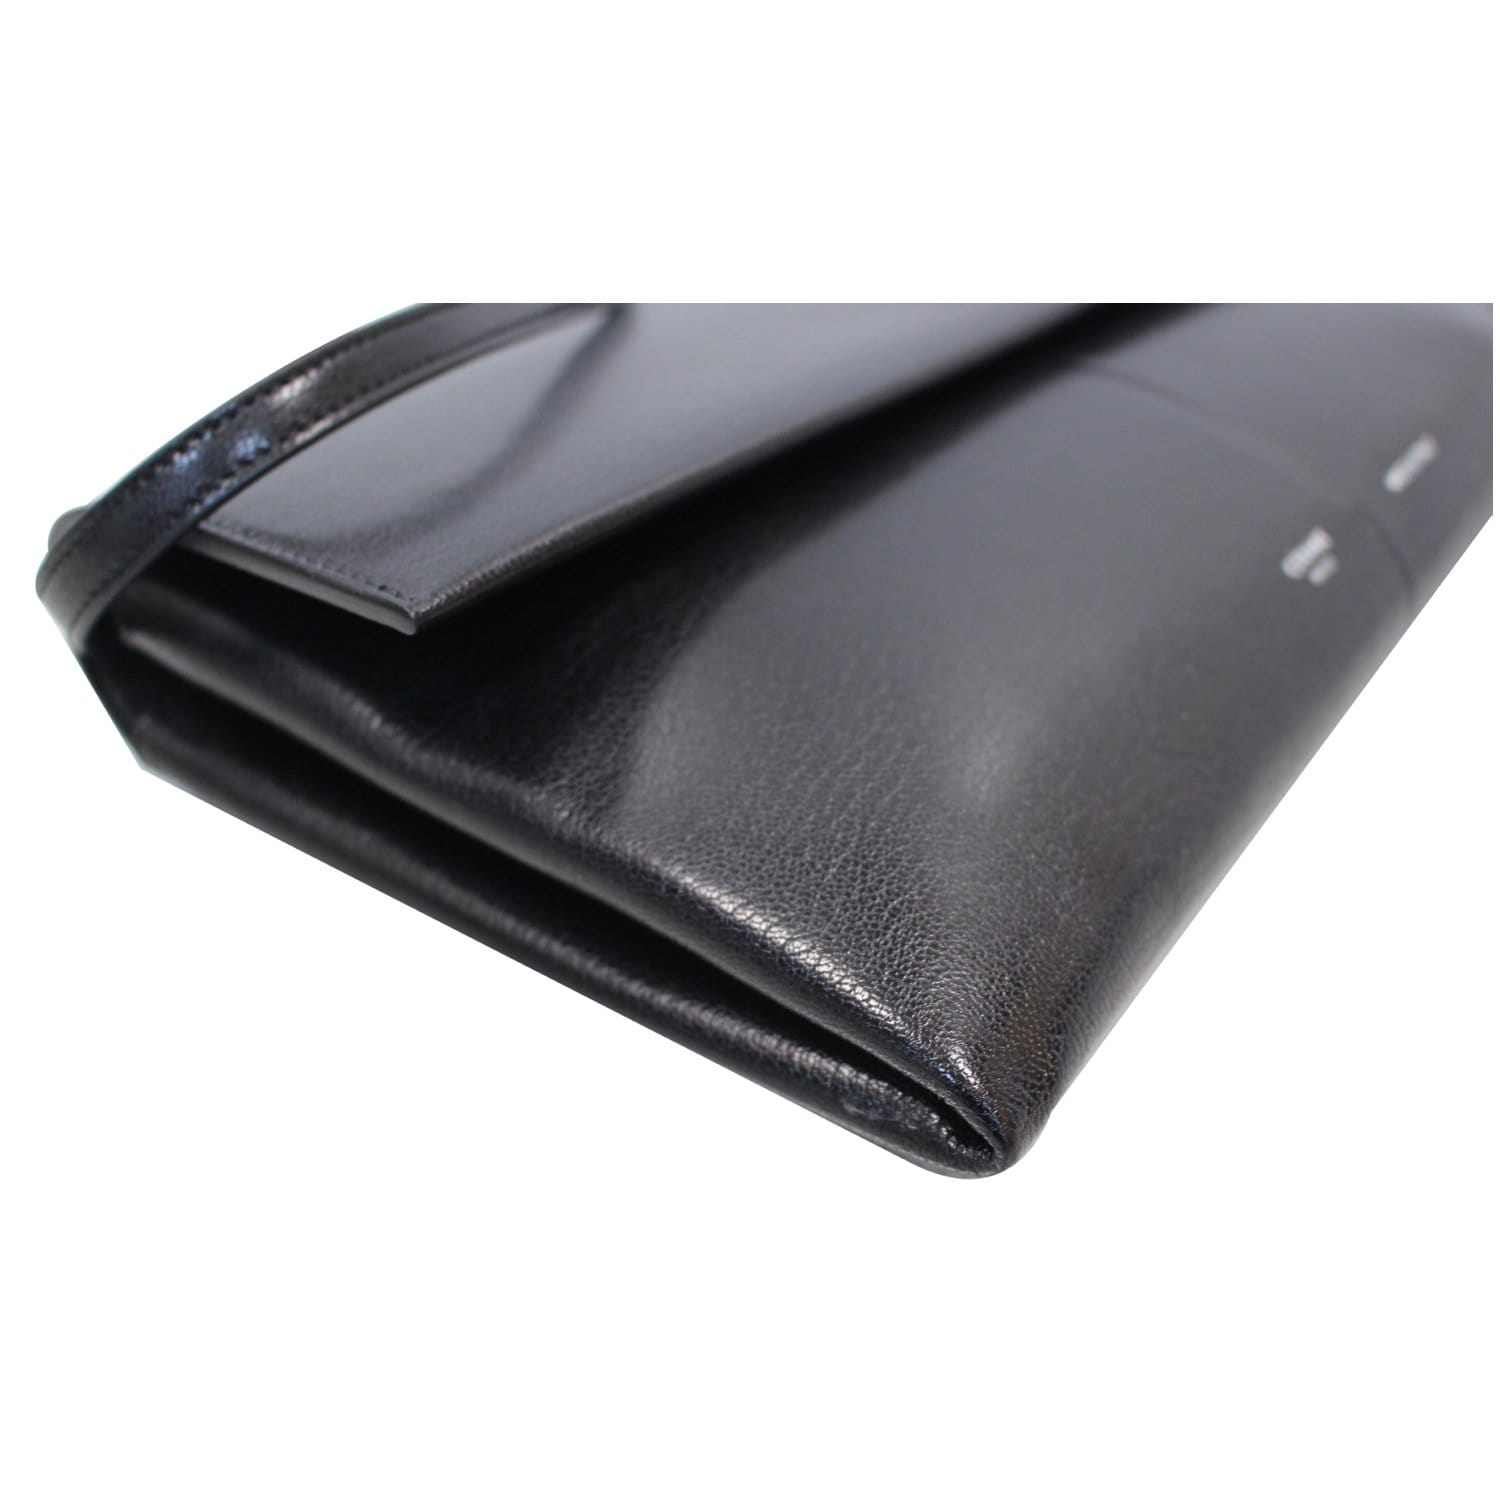 Leather clutch bag Celine Black in Leather - 29712105